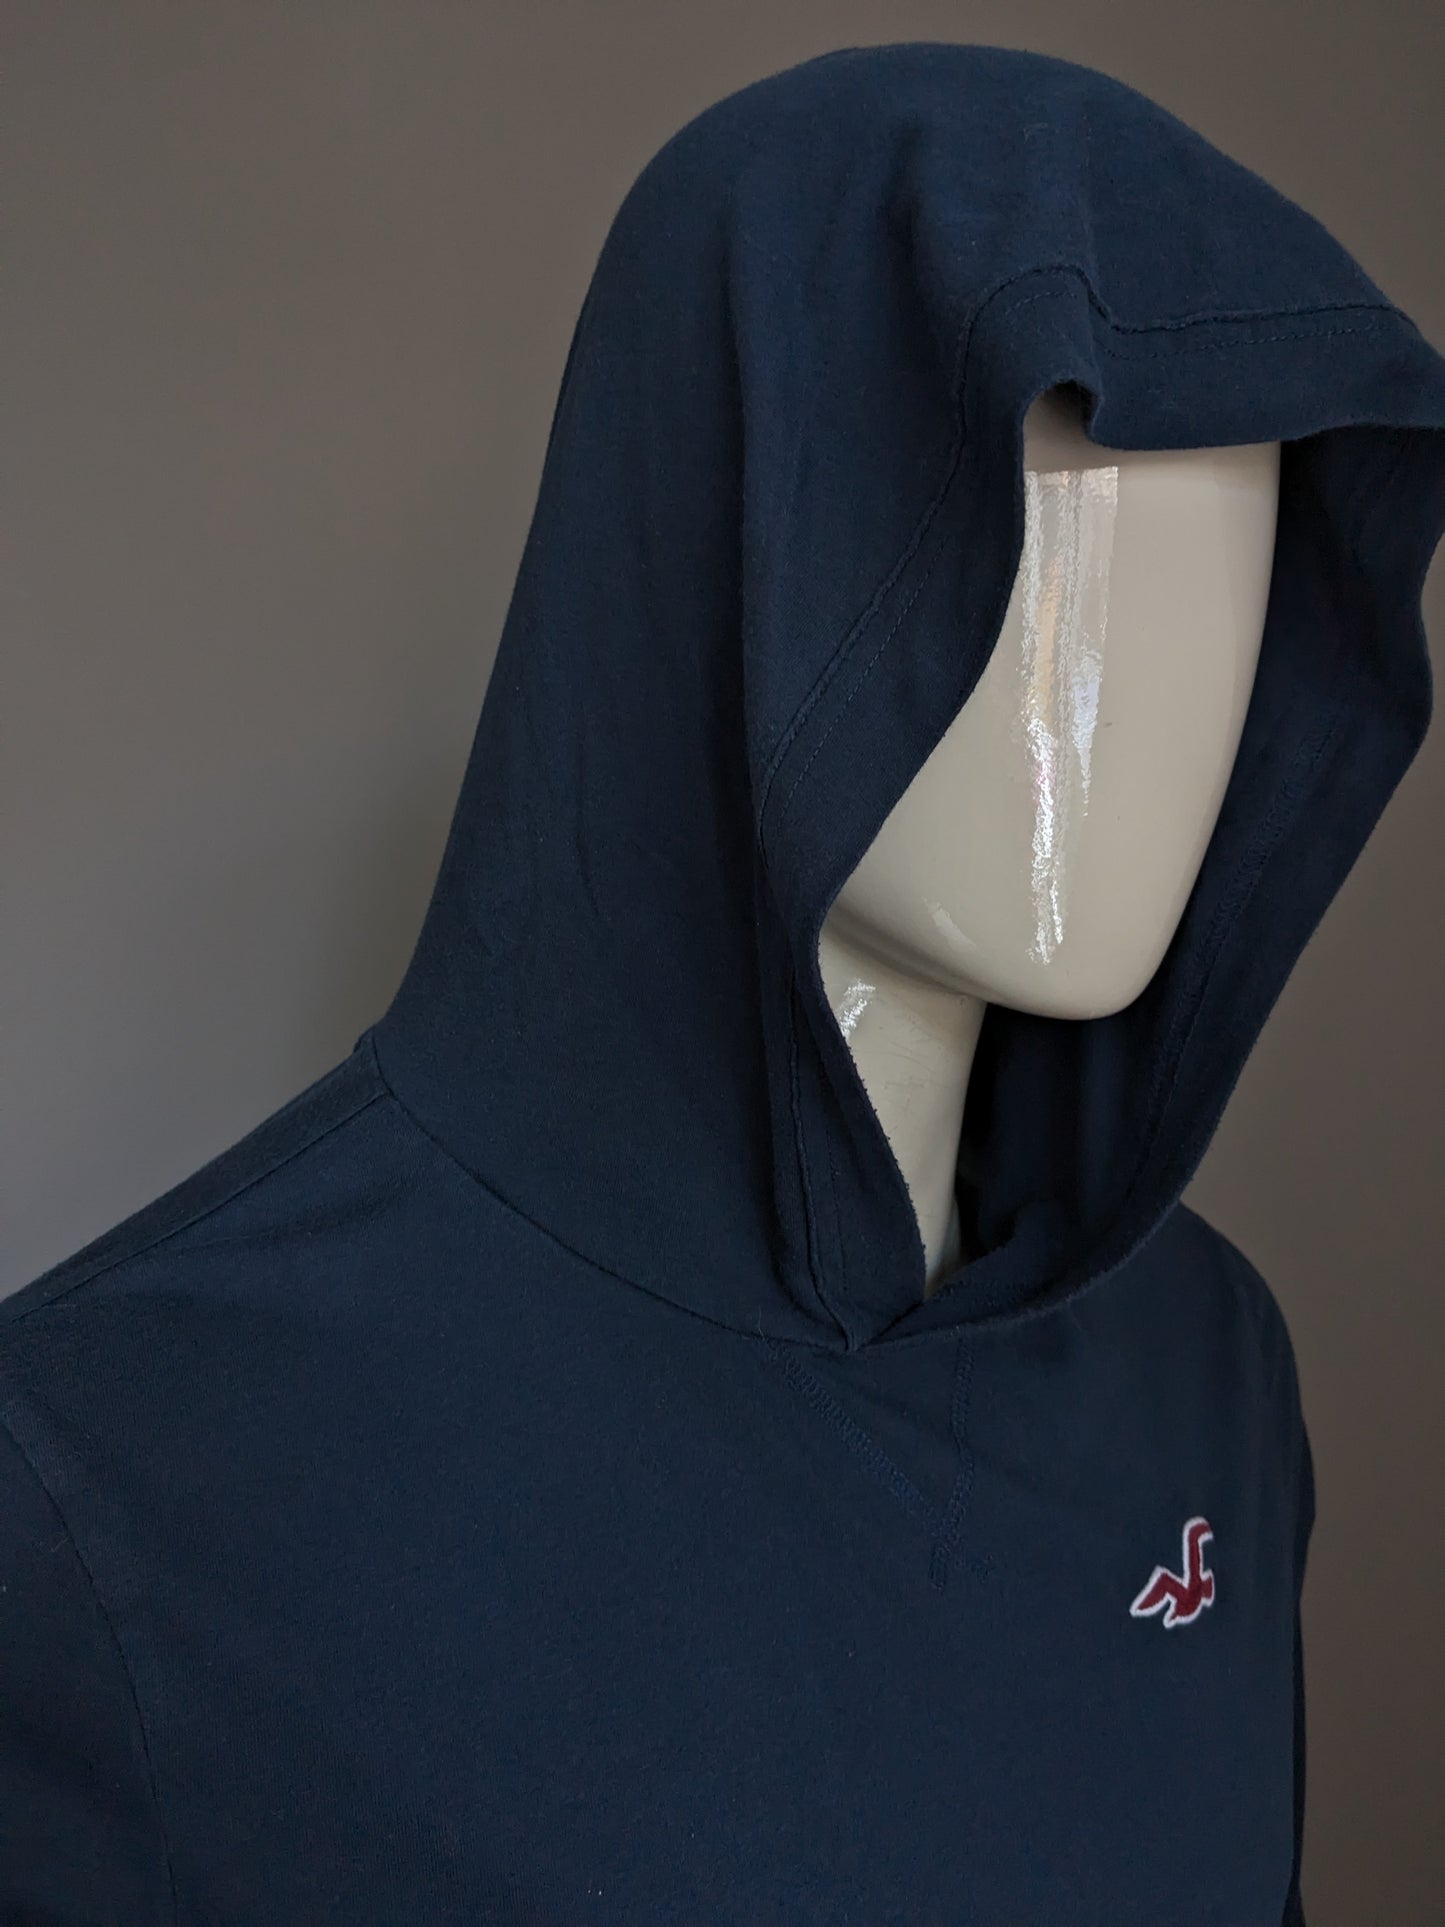 Hollister thin hoodie. Dark blue colored. Size L.